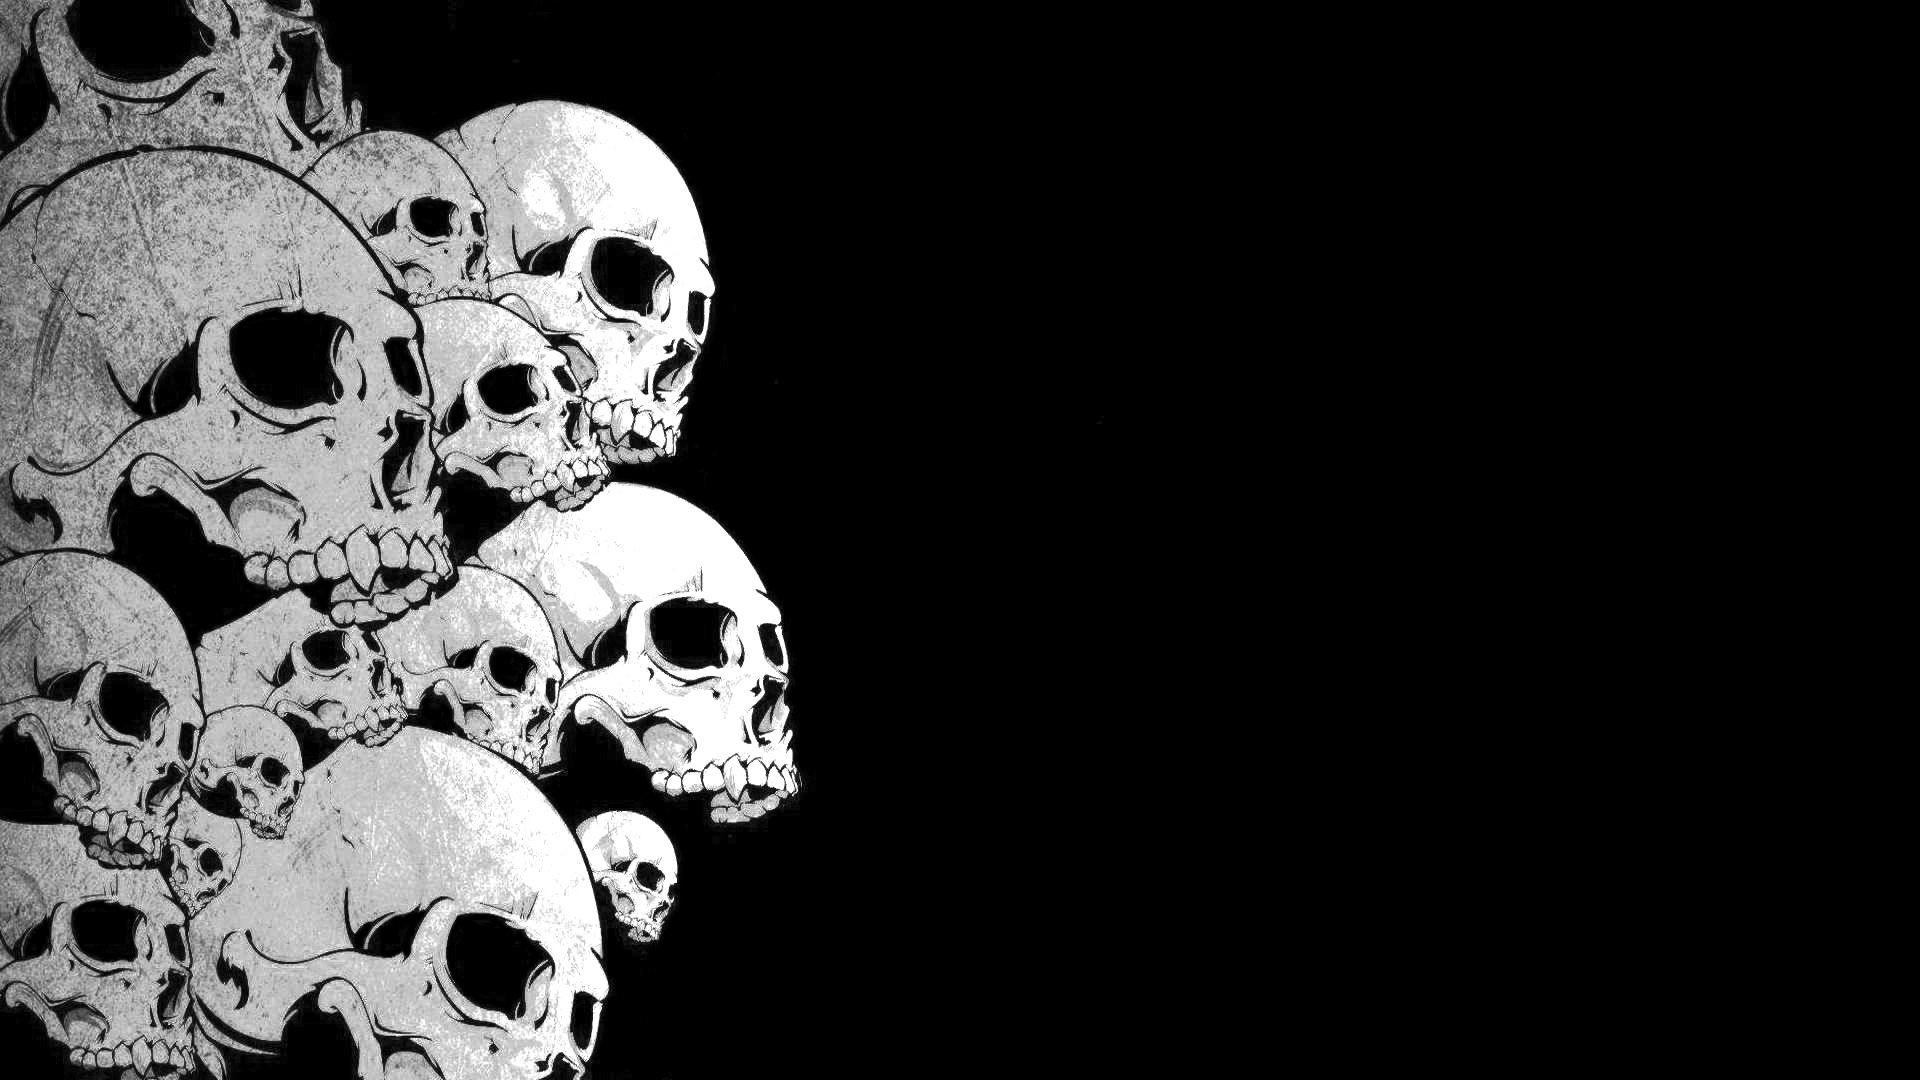 1920x1080 Free Skull Wallpapers For Laptops (, 0.16 Mb)